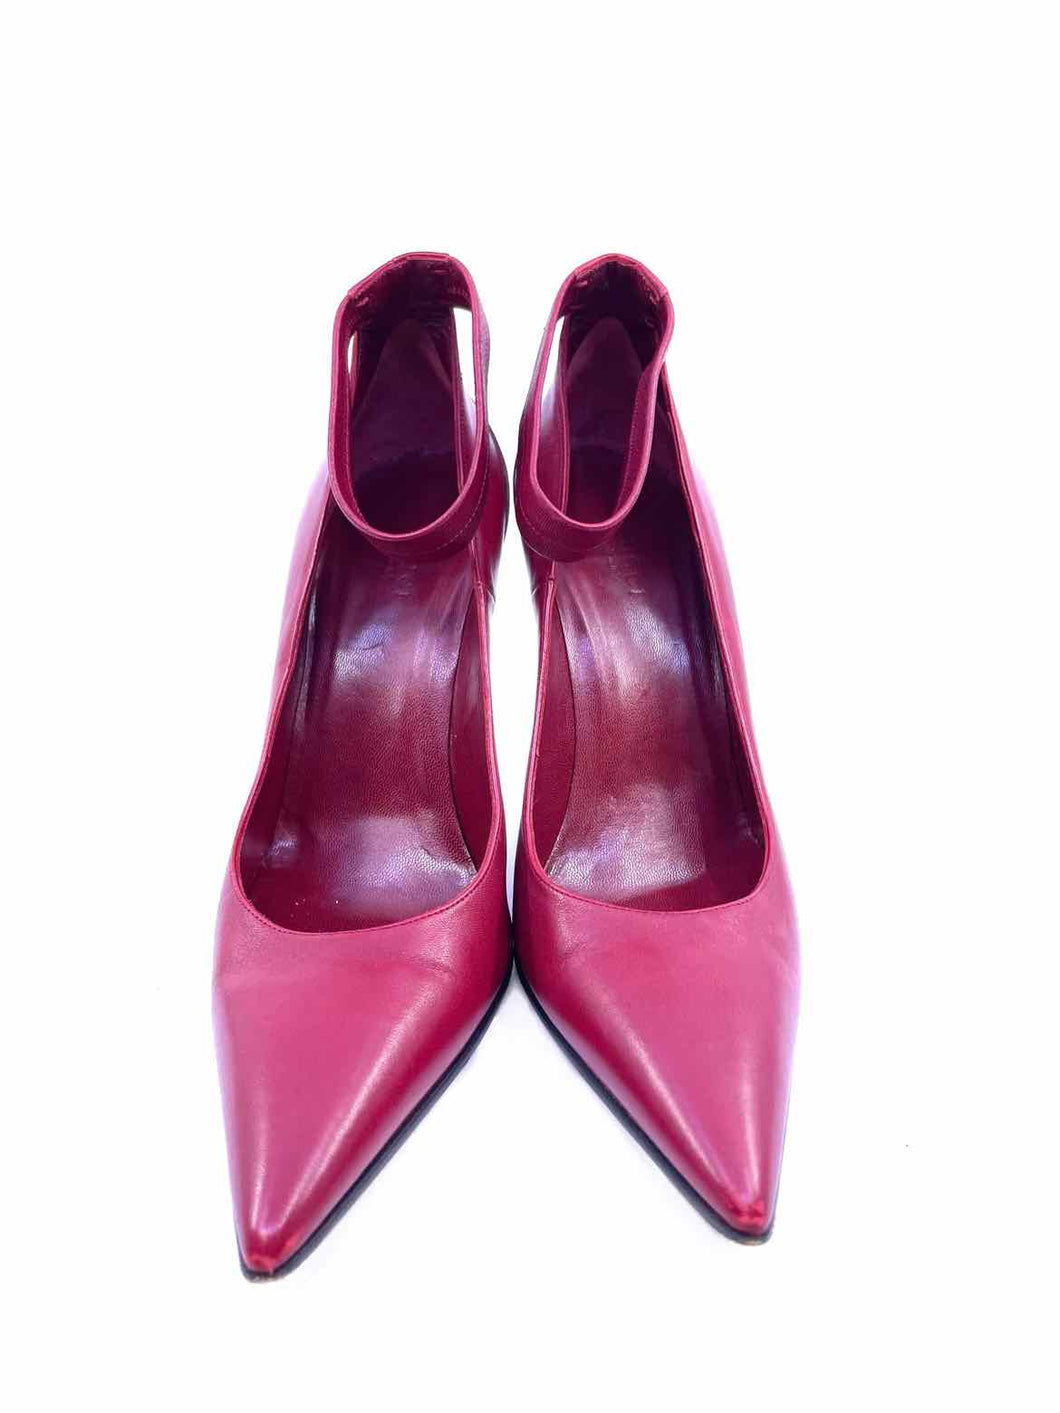 GUCCI Size 7.5 Red Leather Pumps